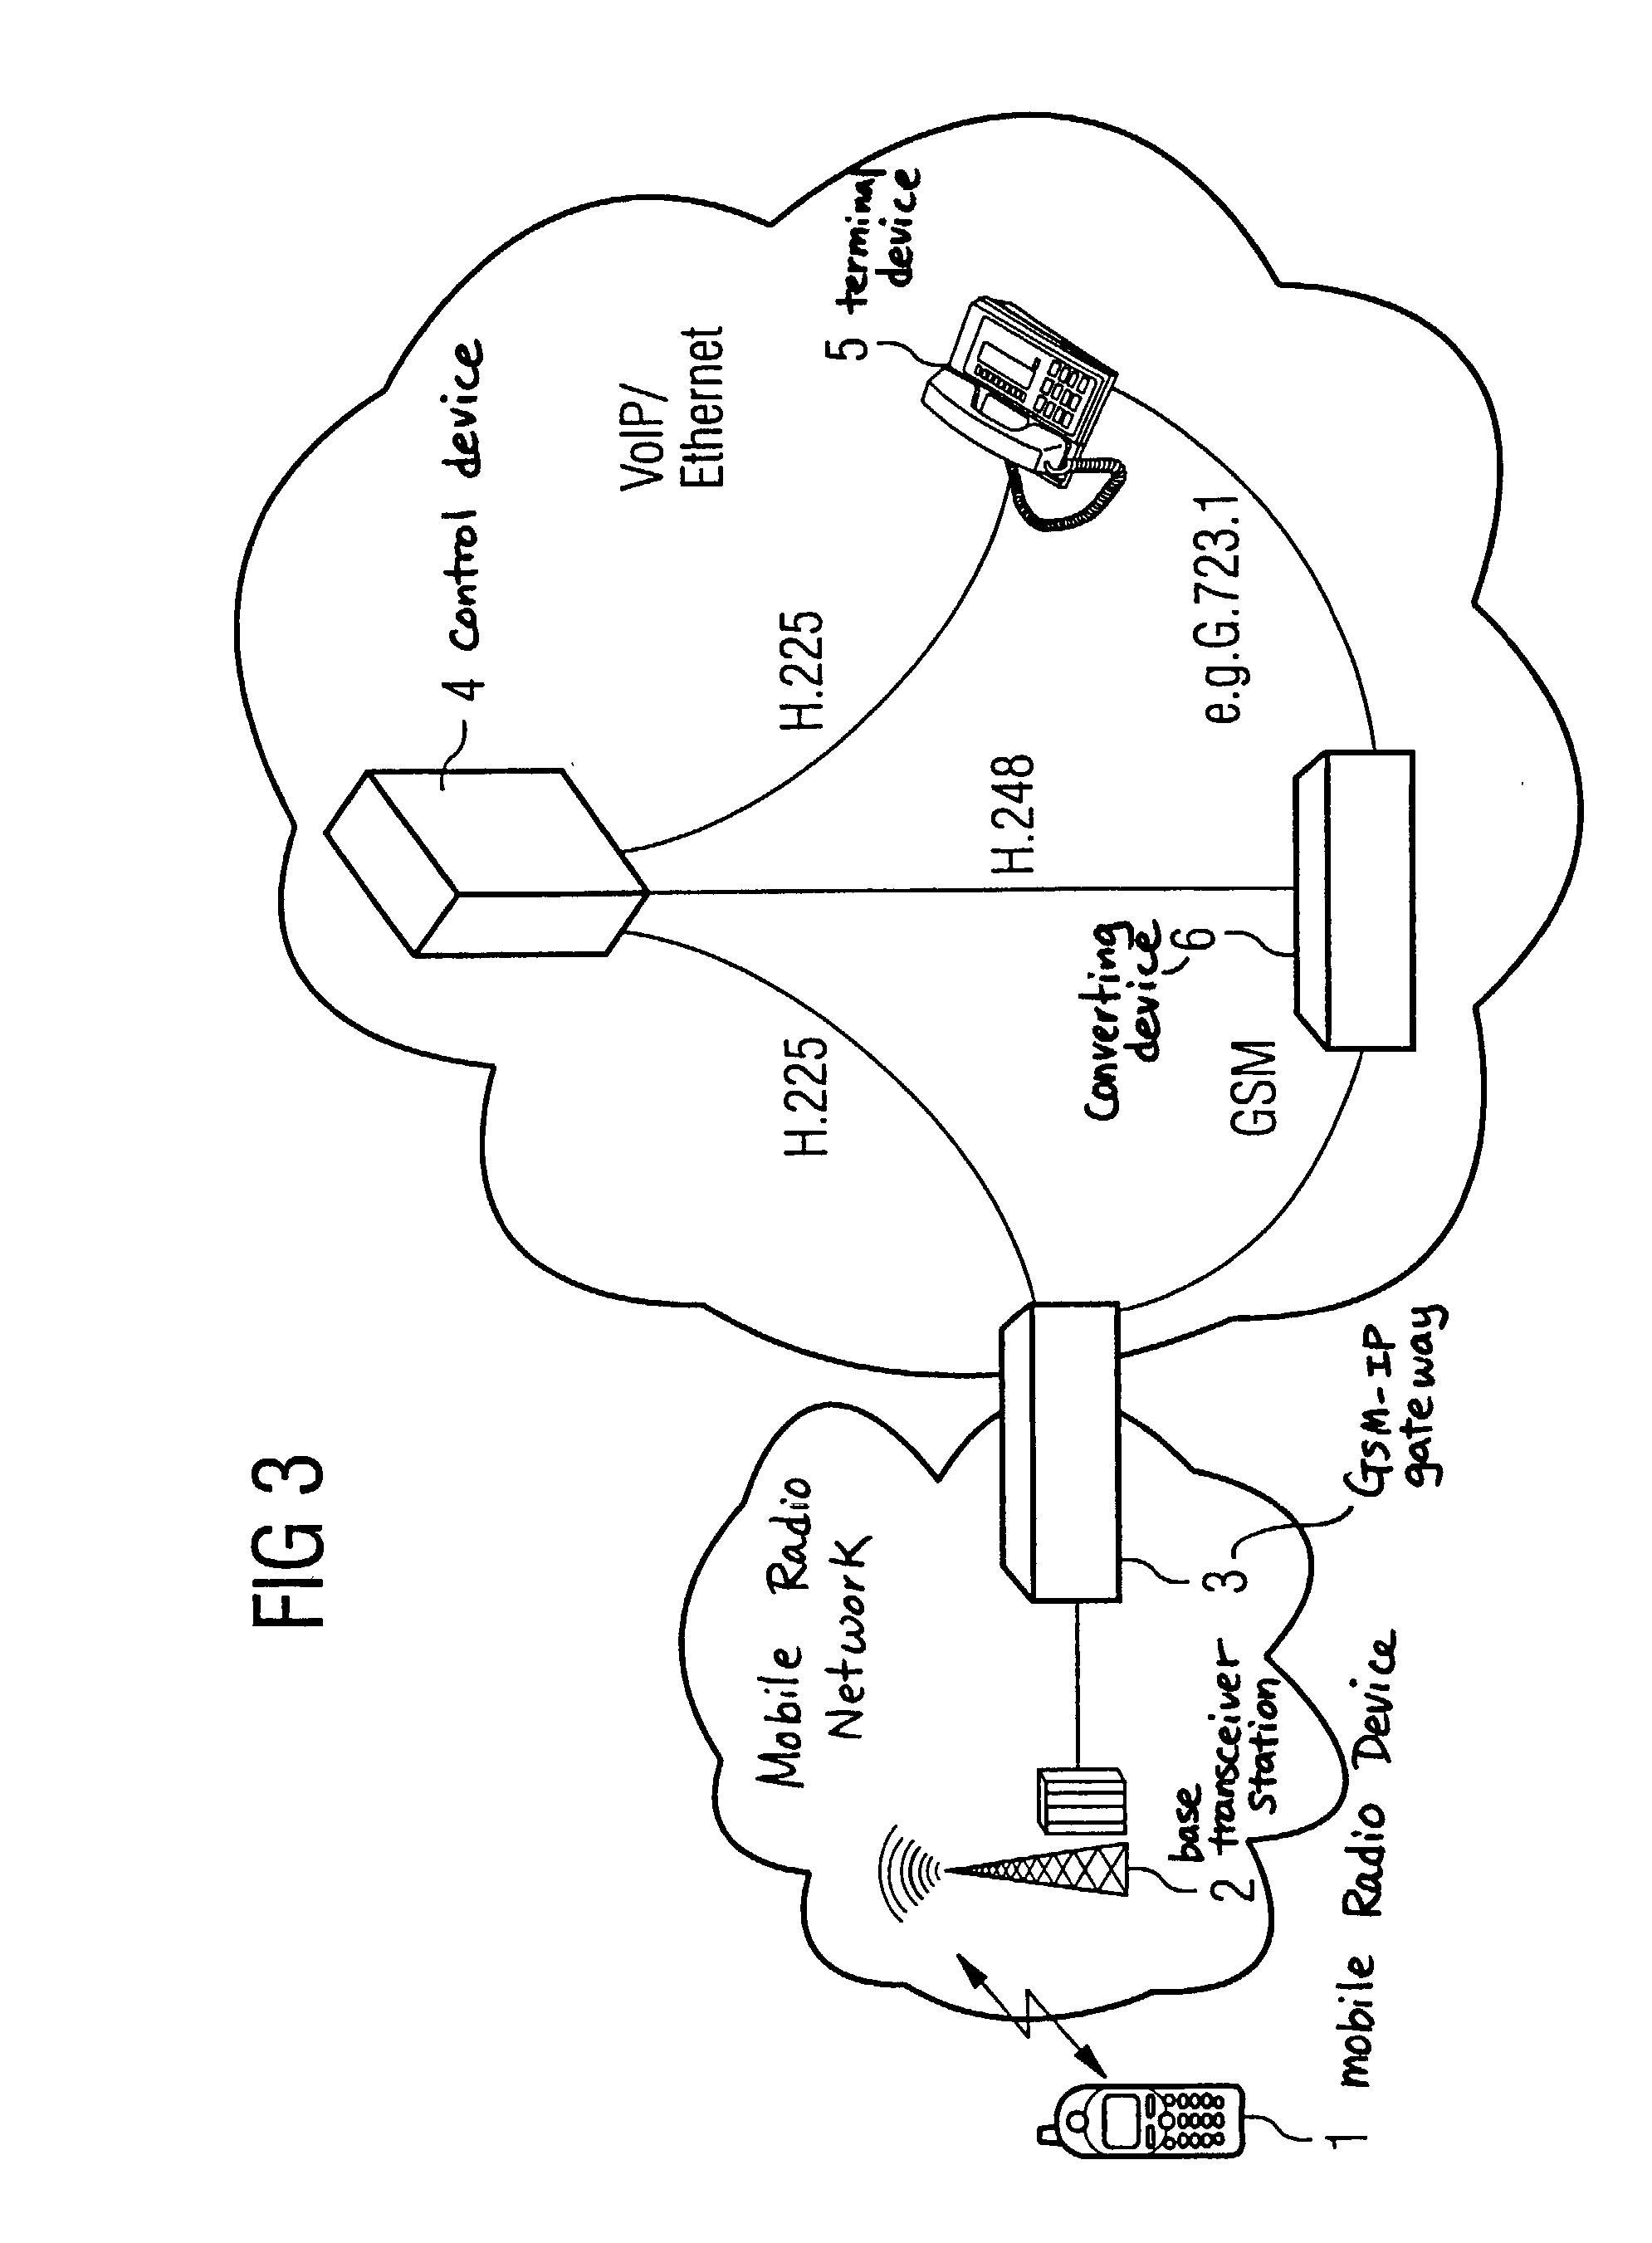 Method and device for the transmission of data in a packet-oriented data network